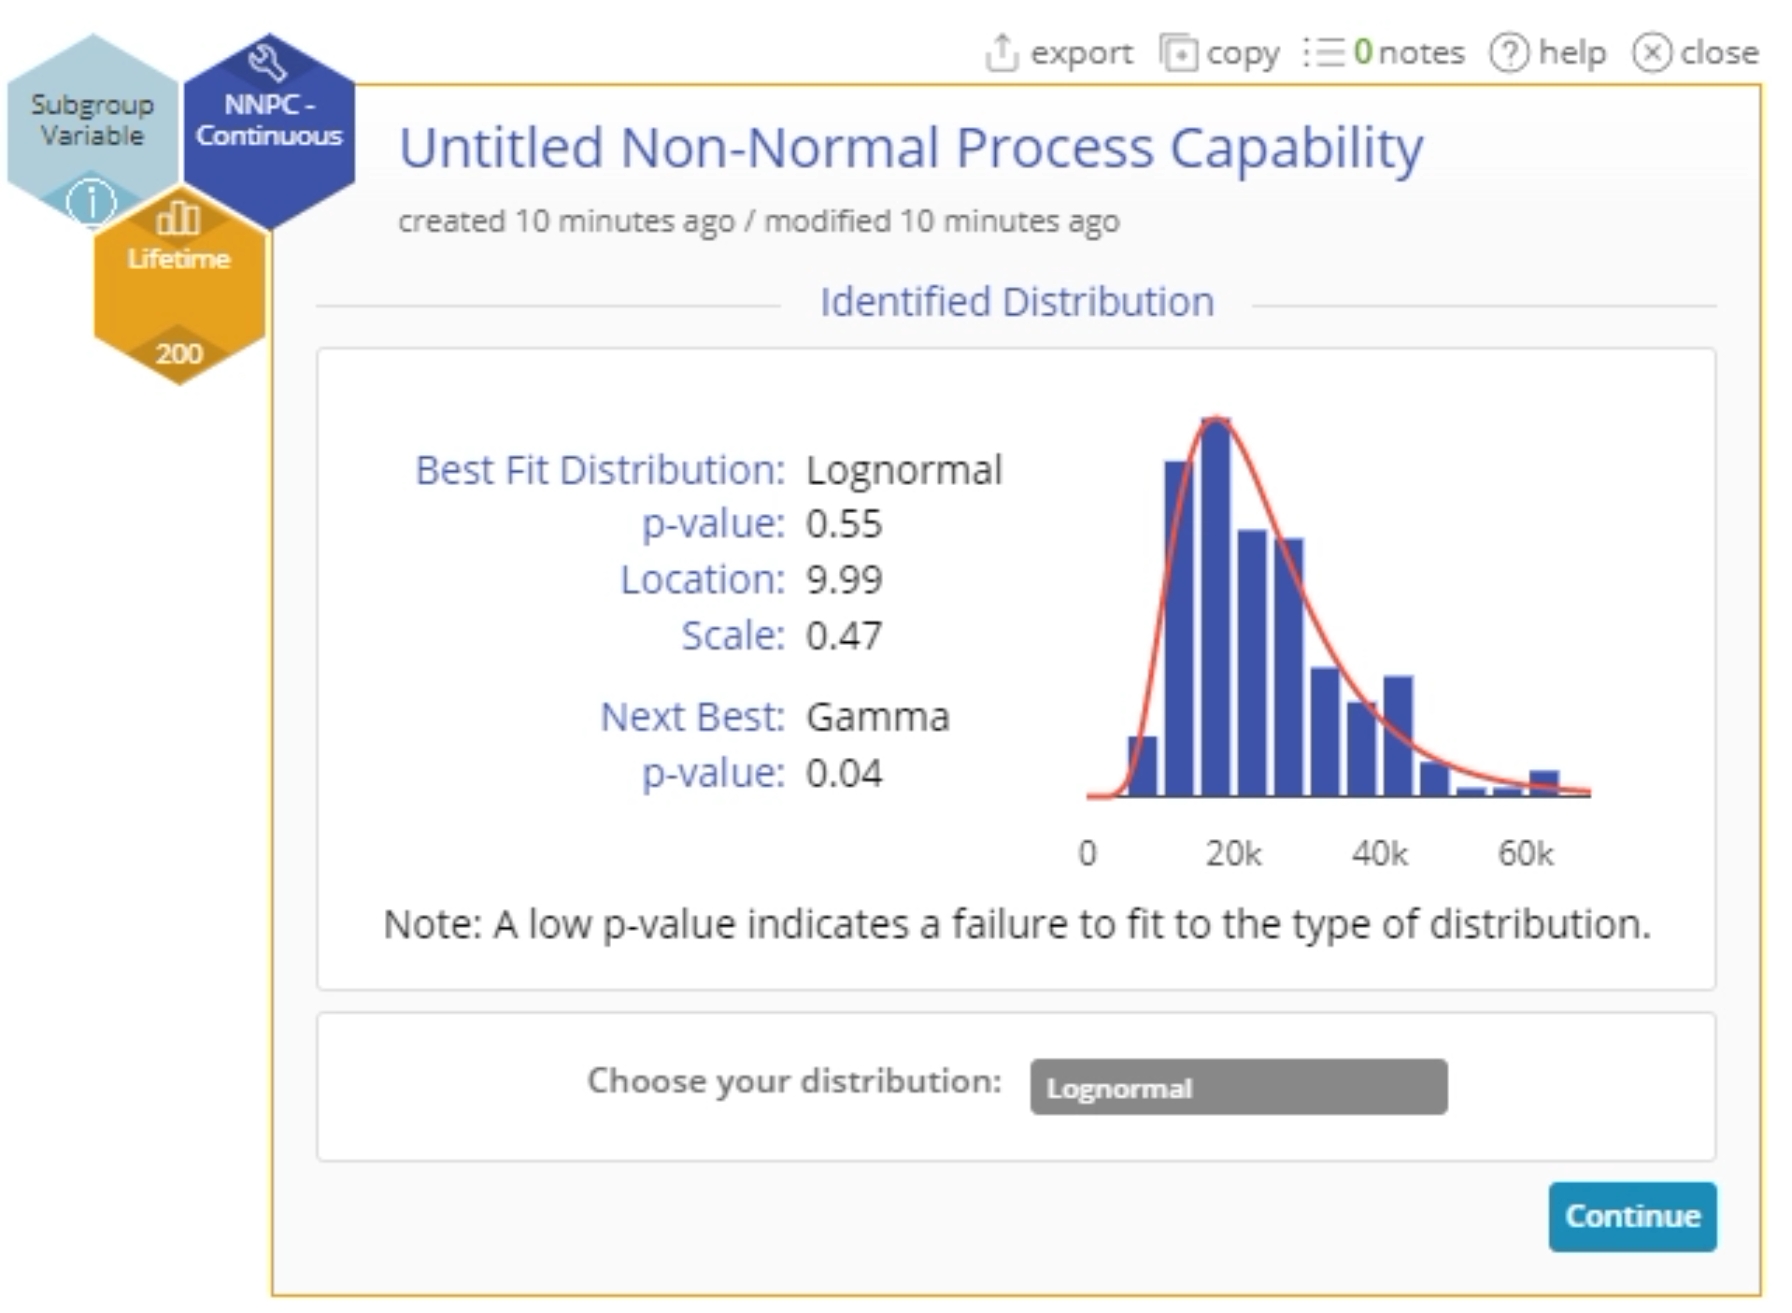 Non-normal process capabilities identified distribution.